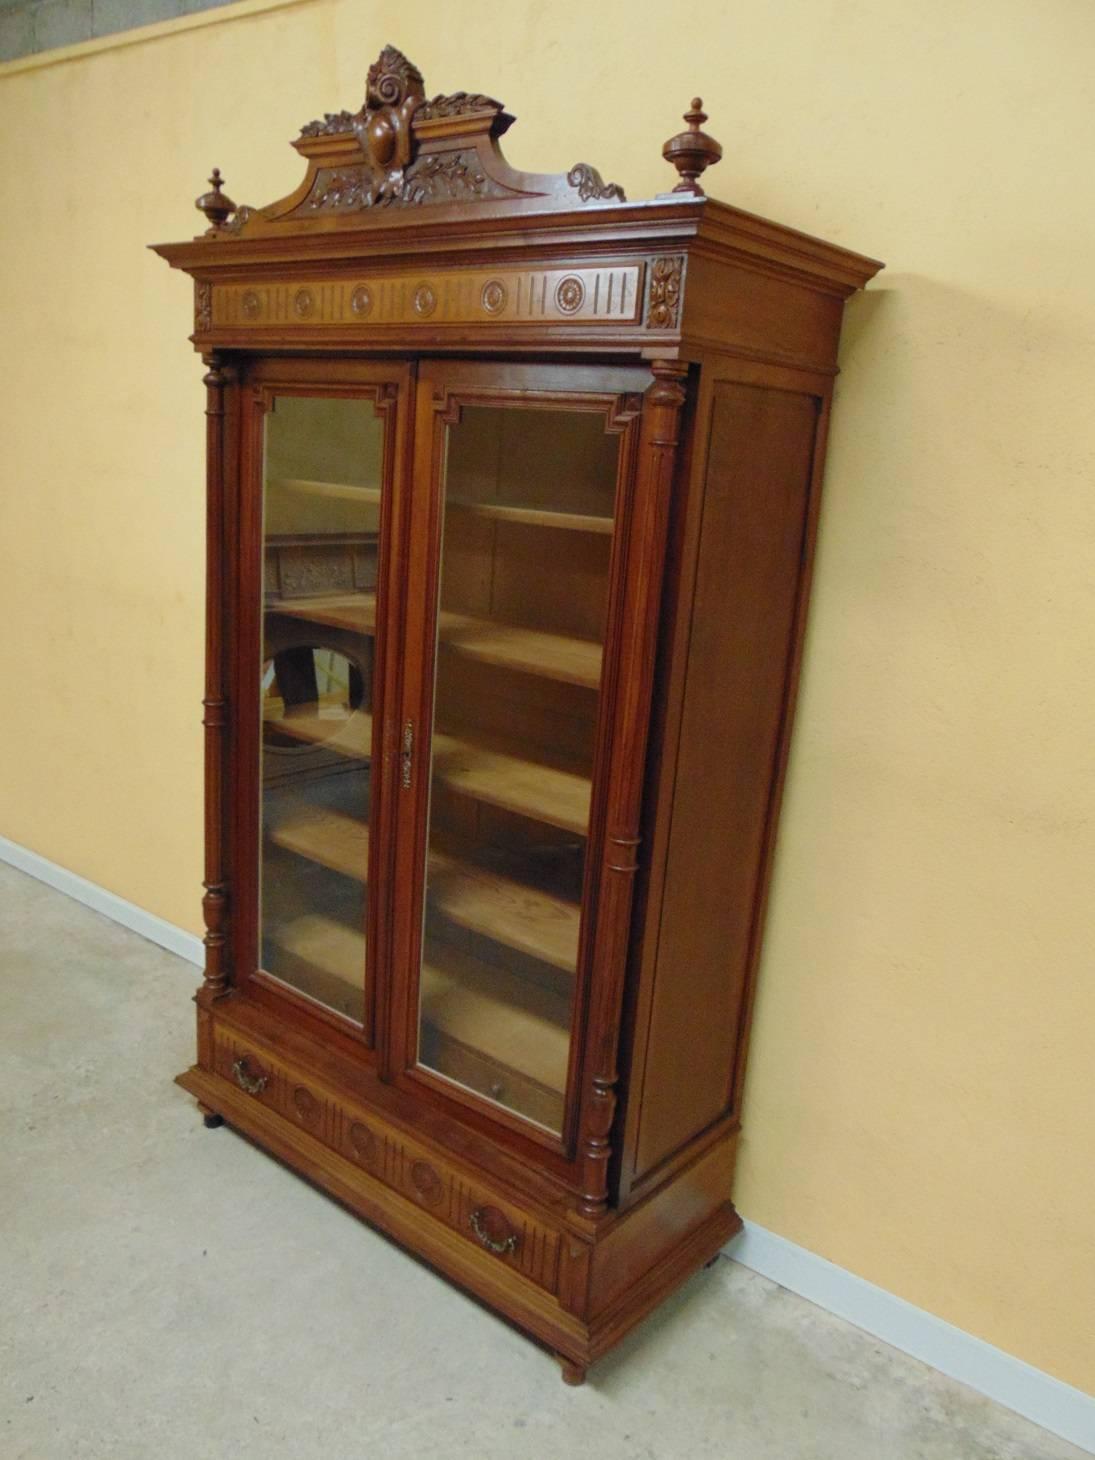 Beautiful solid Walnut Louis XVI style French two door bookcase hand carved and having fully adjustable shelves.  C1890 Disassembles completely by undoing just four bolts for moving and easy access to stairways and doorways.